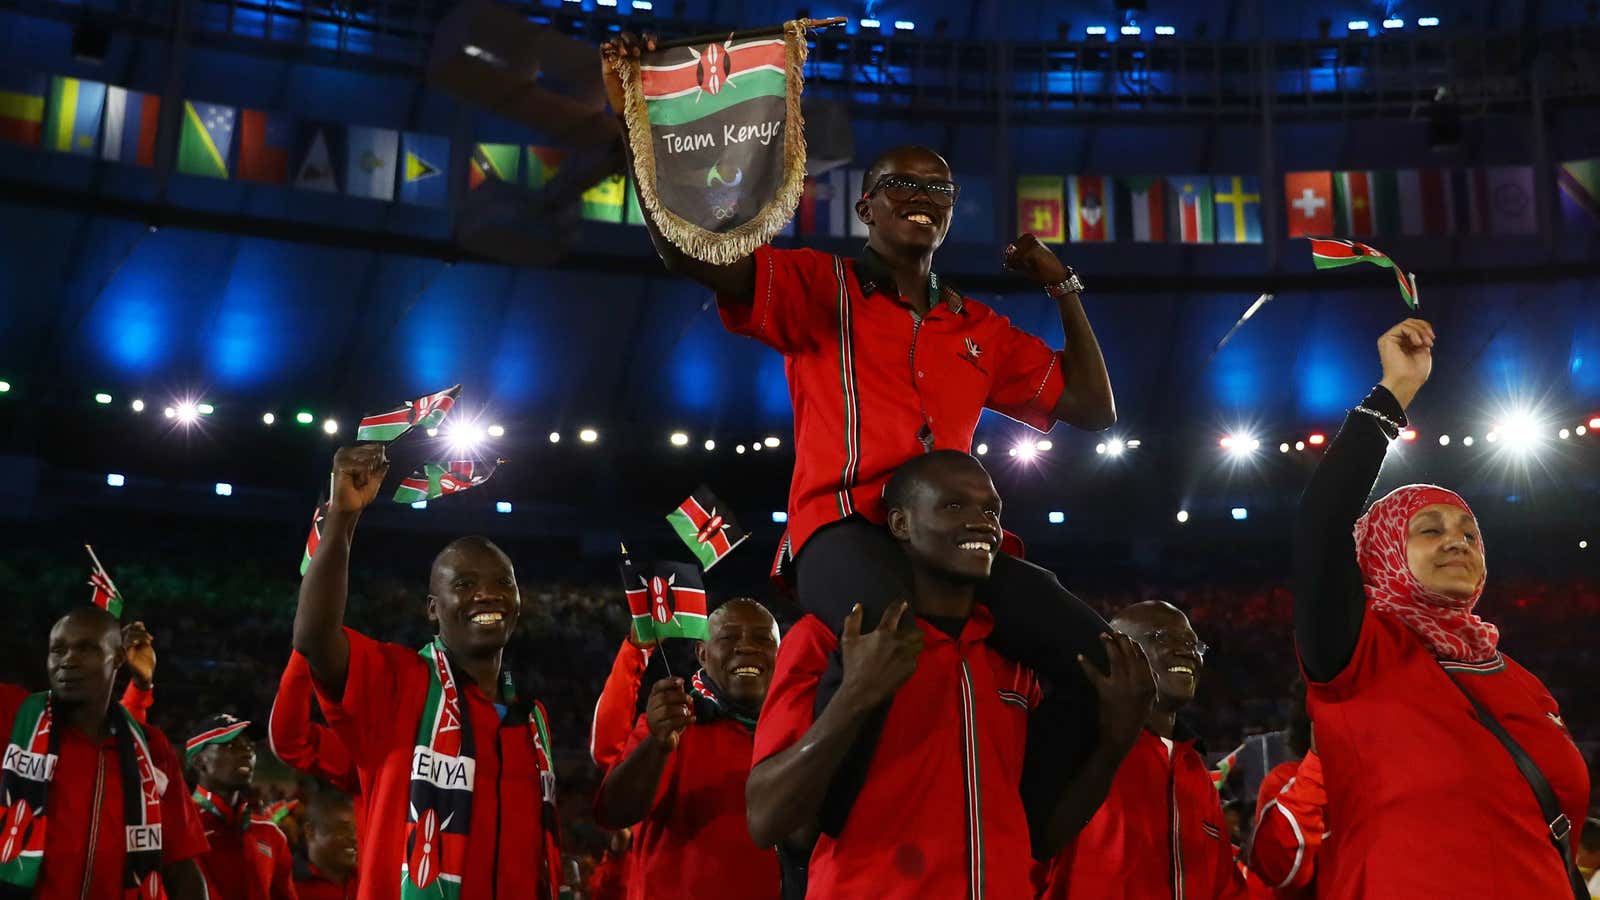 Team Kenya at the opening ceremony.